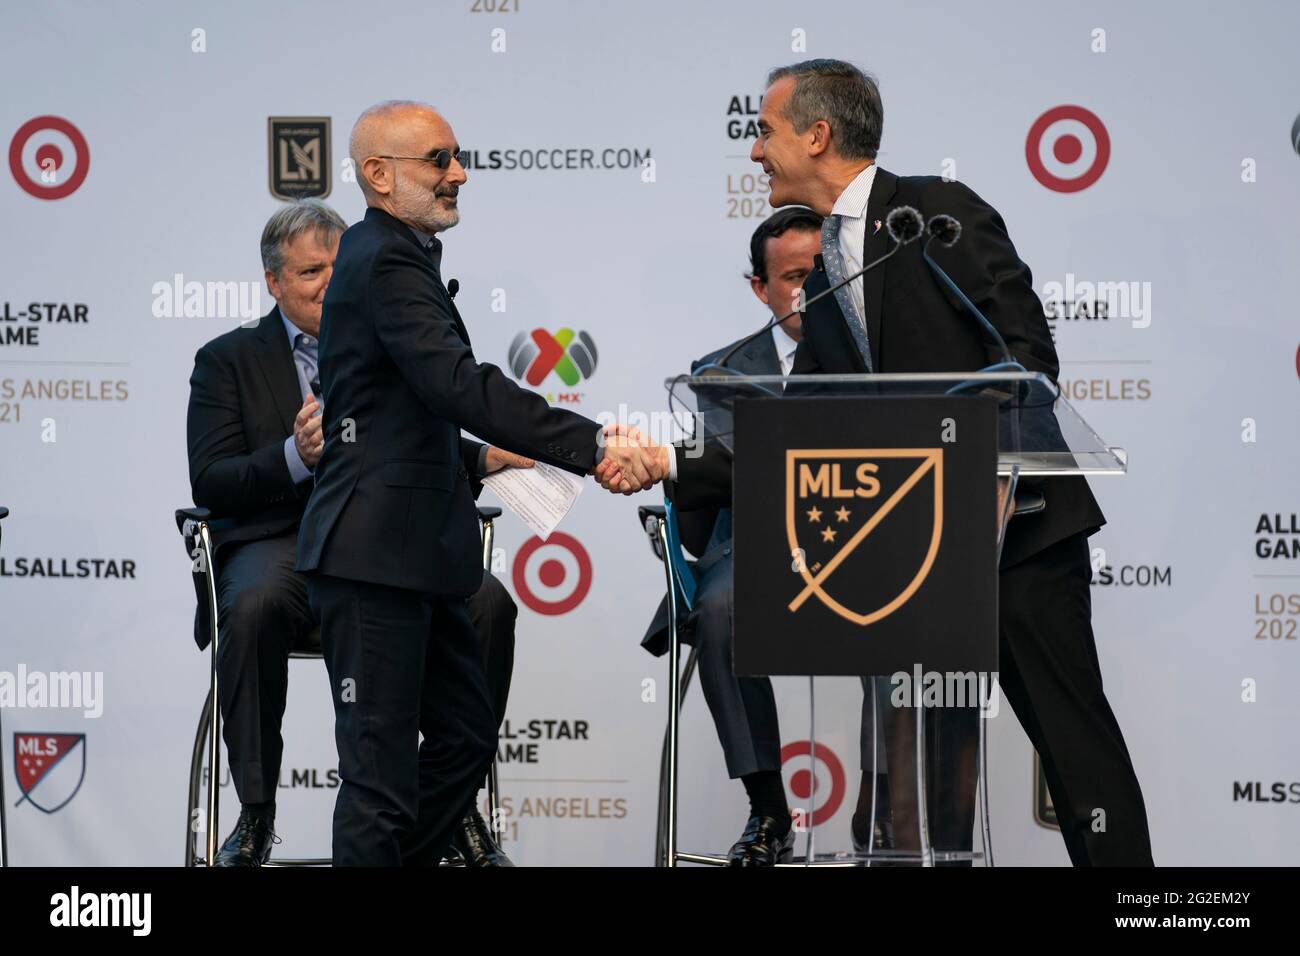 Mayor of Los Angeles, Eric Garcetti greets LAFC President and CBO, Larry Freedman during a MLS and LIGA MX press announcement at Banc of California, W Stock Photo